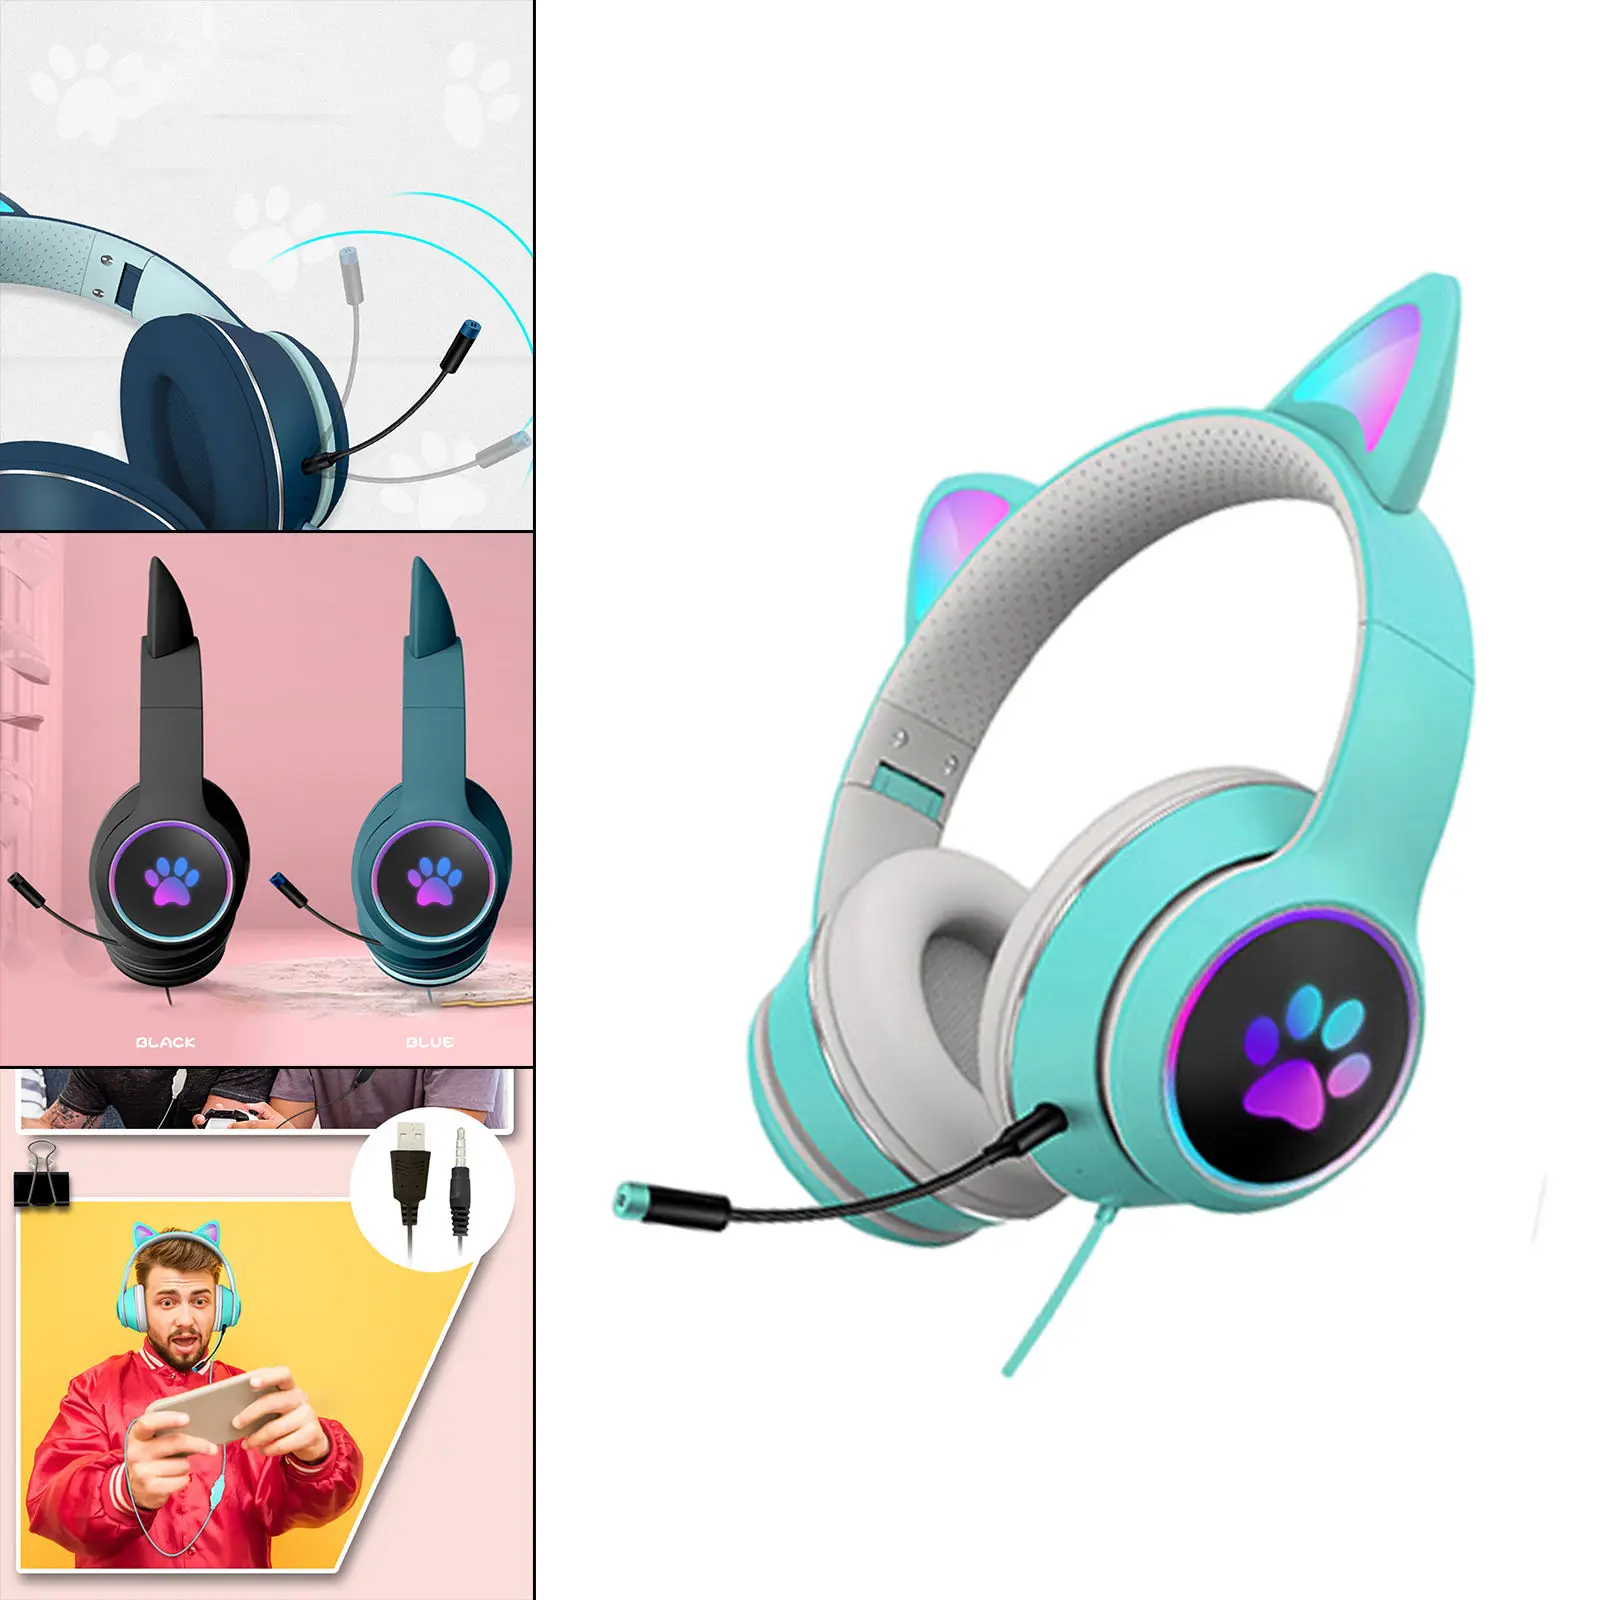 Wired Over-Ear Headset RGB LED Light Surround Sound Cute Foldable Gamer Headphones Kids Gift 40mm Drivers Noise Canceling